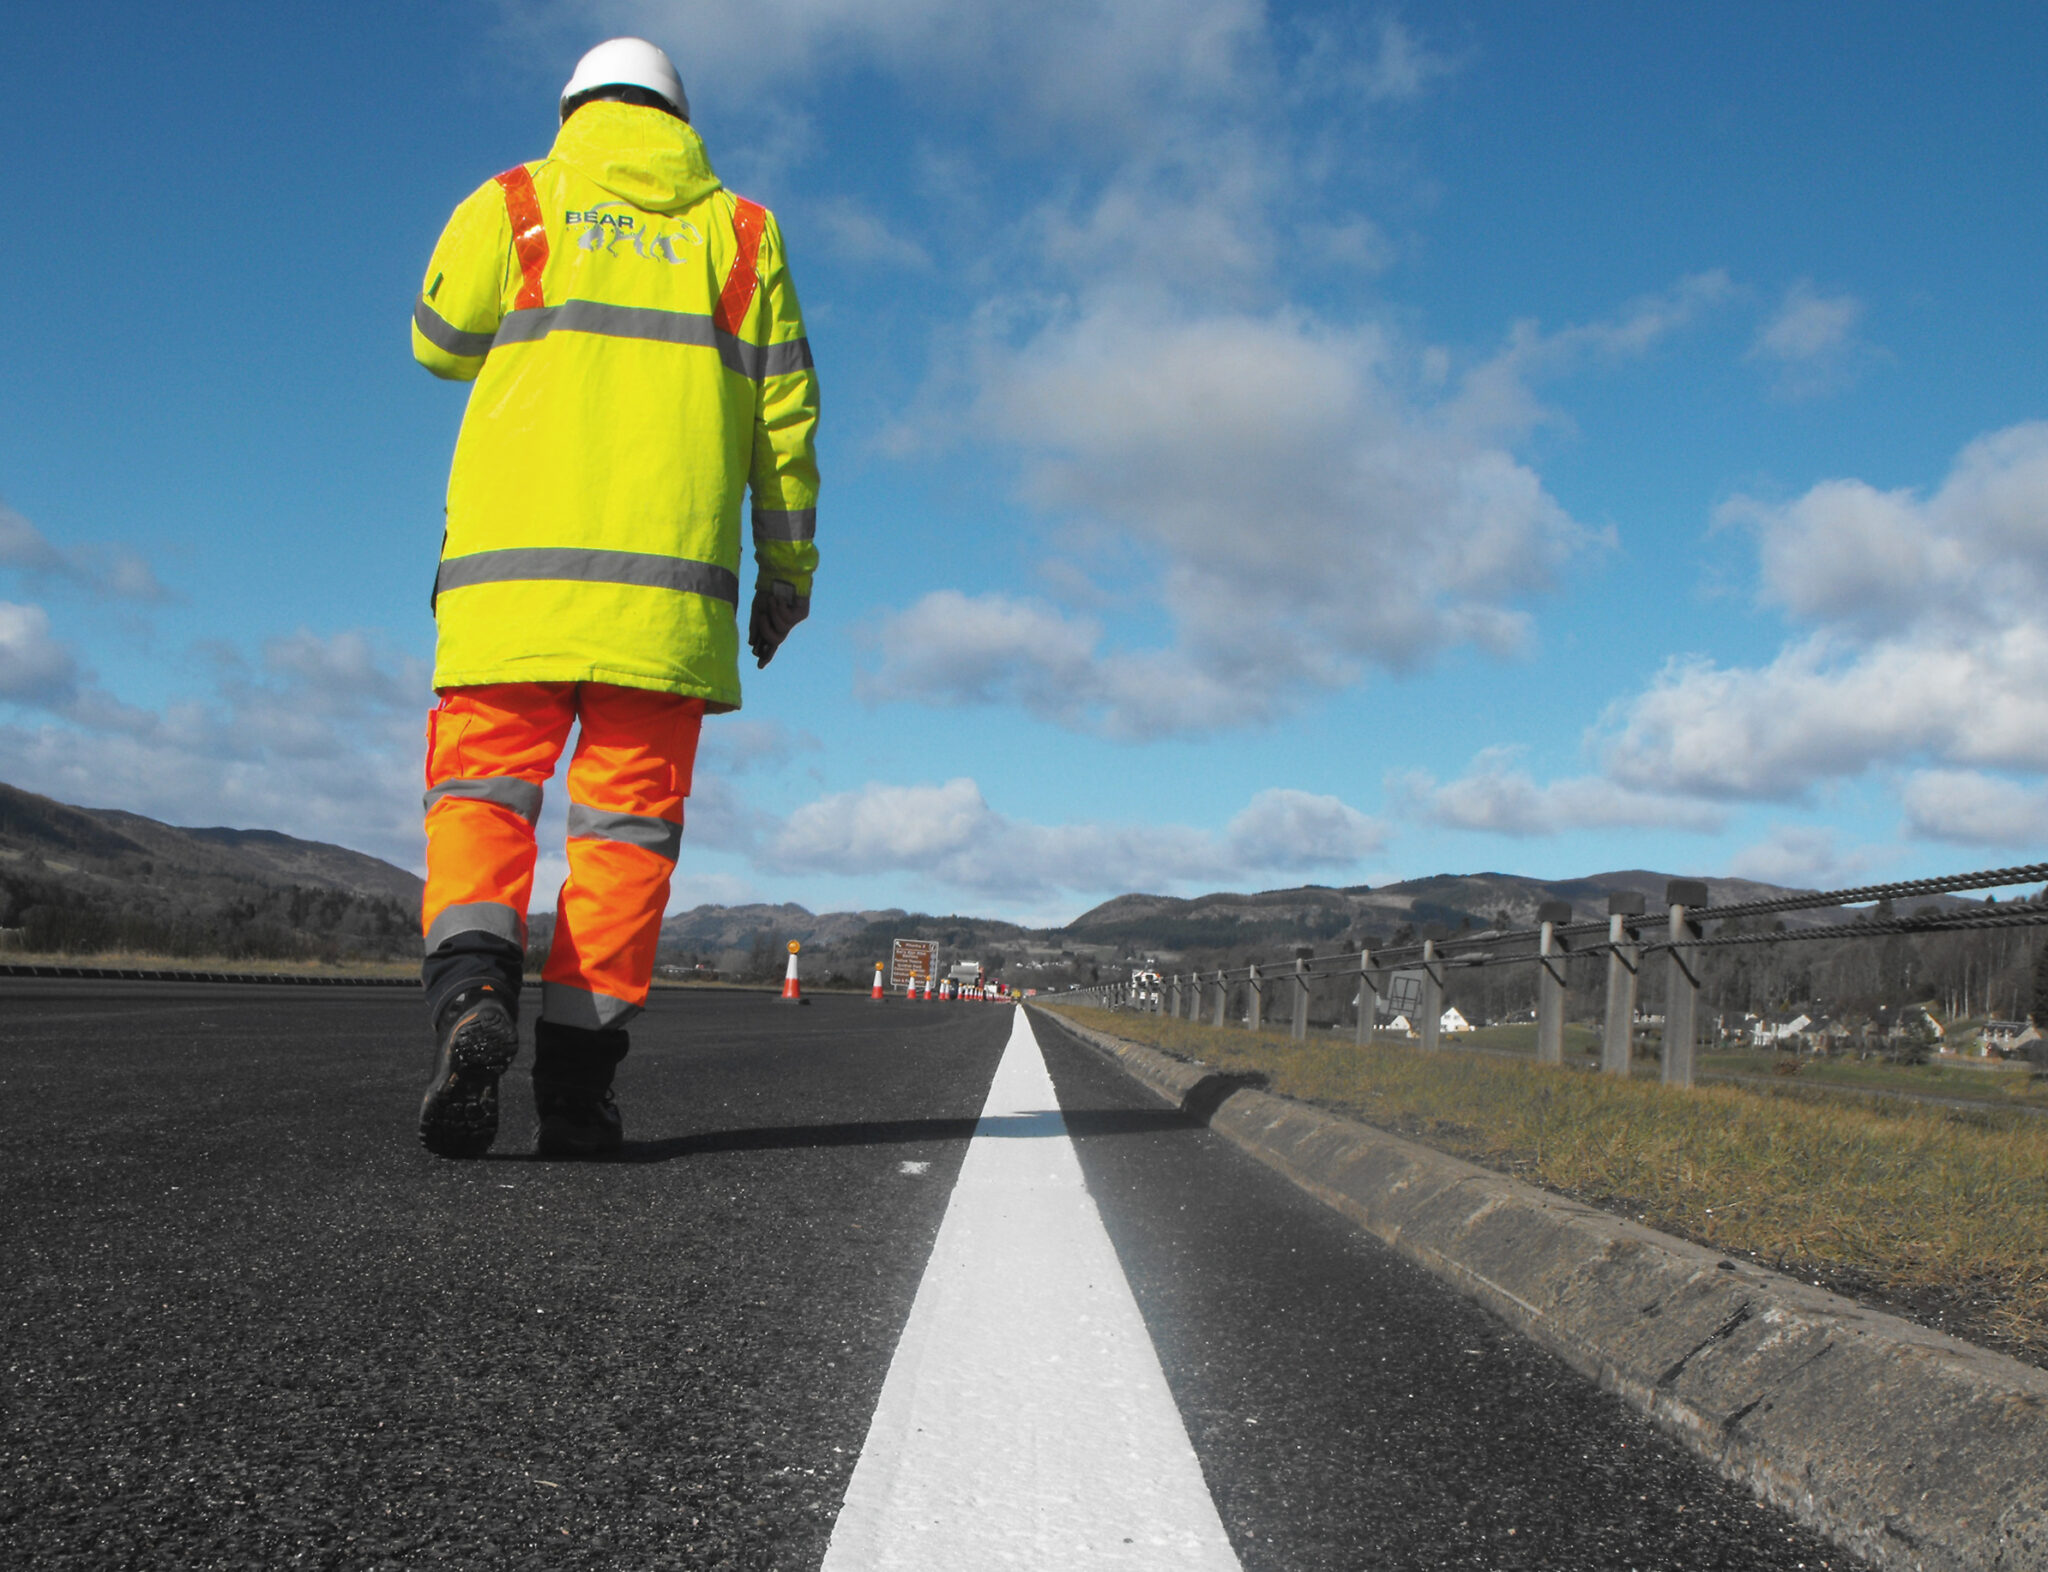 £230,000 OVERNIGHT SURFACING IMPROVEMENTS PLANNED FOR A83 NEAR INVERARAY